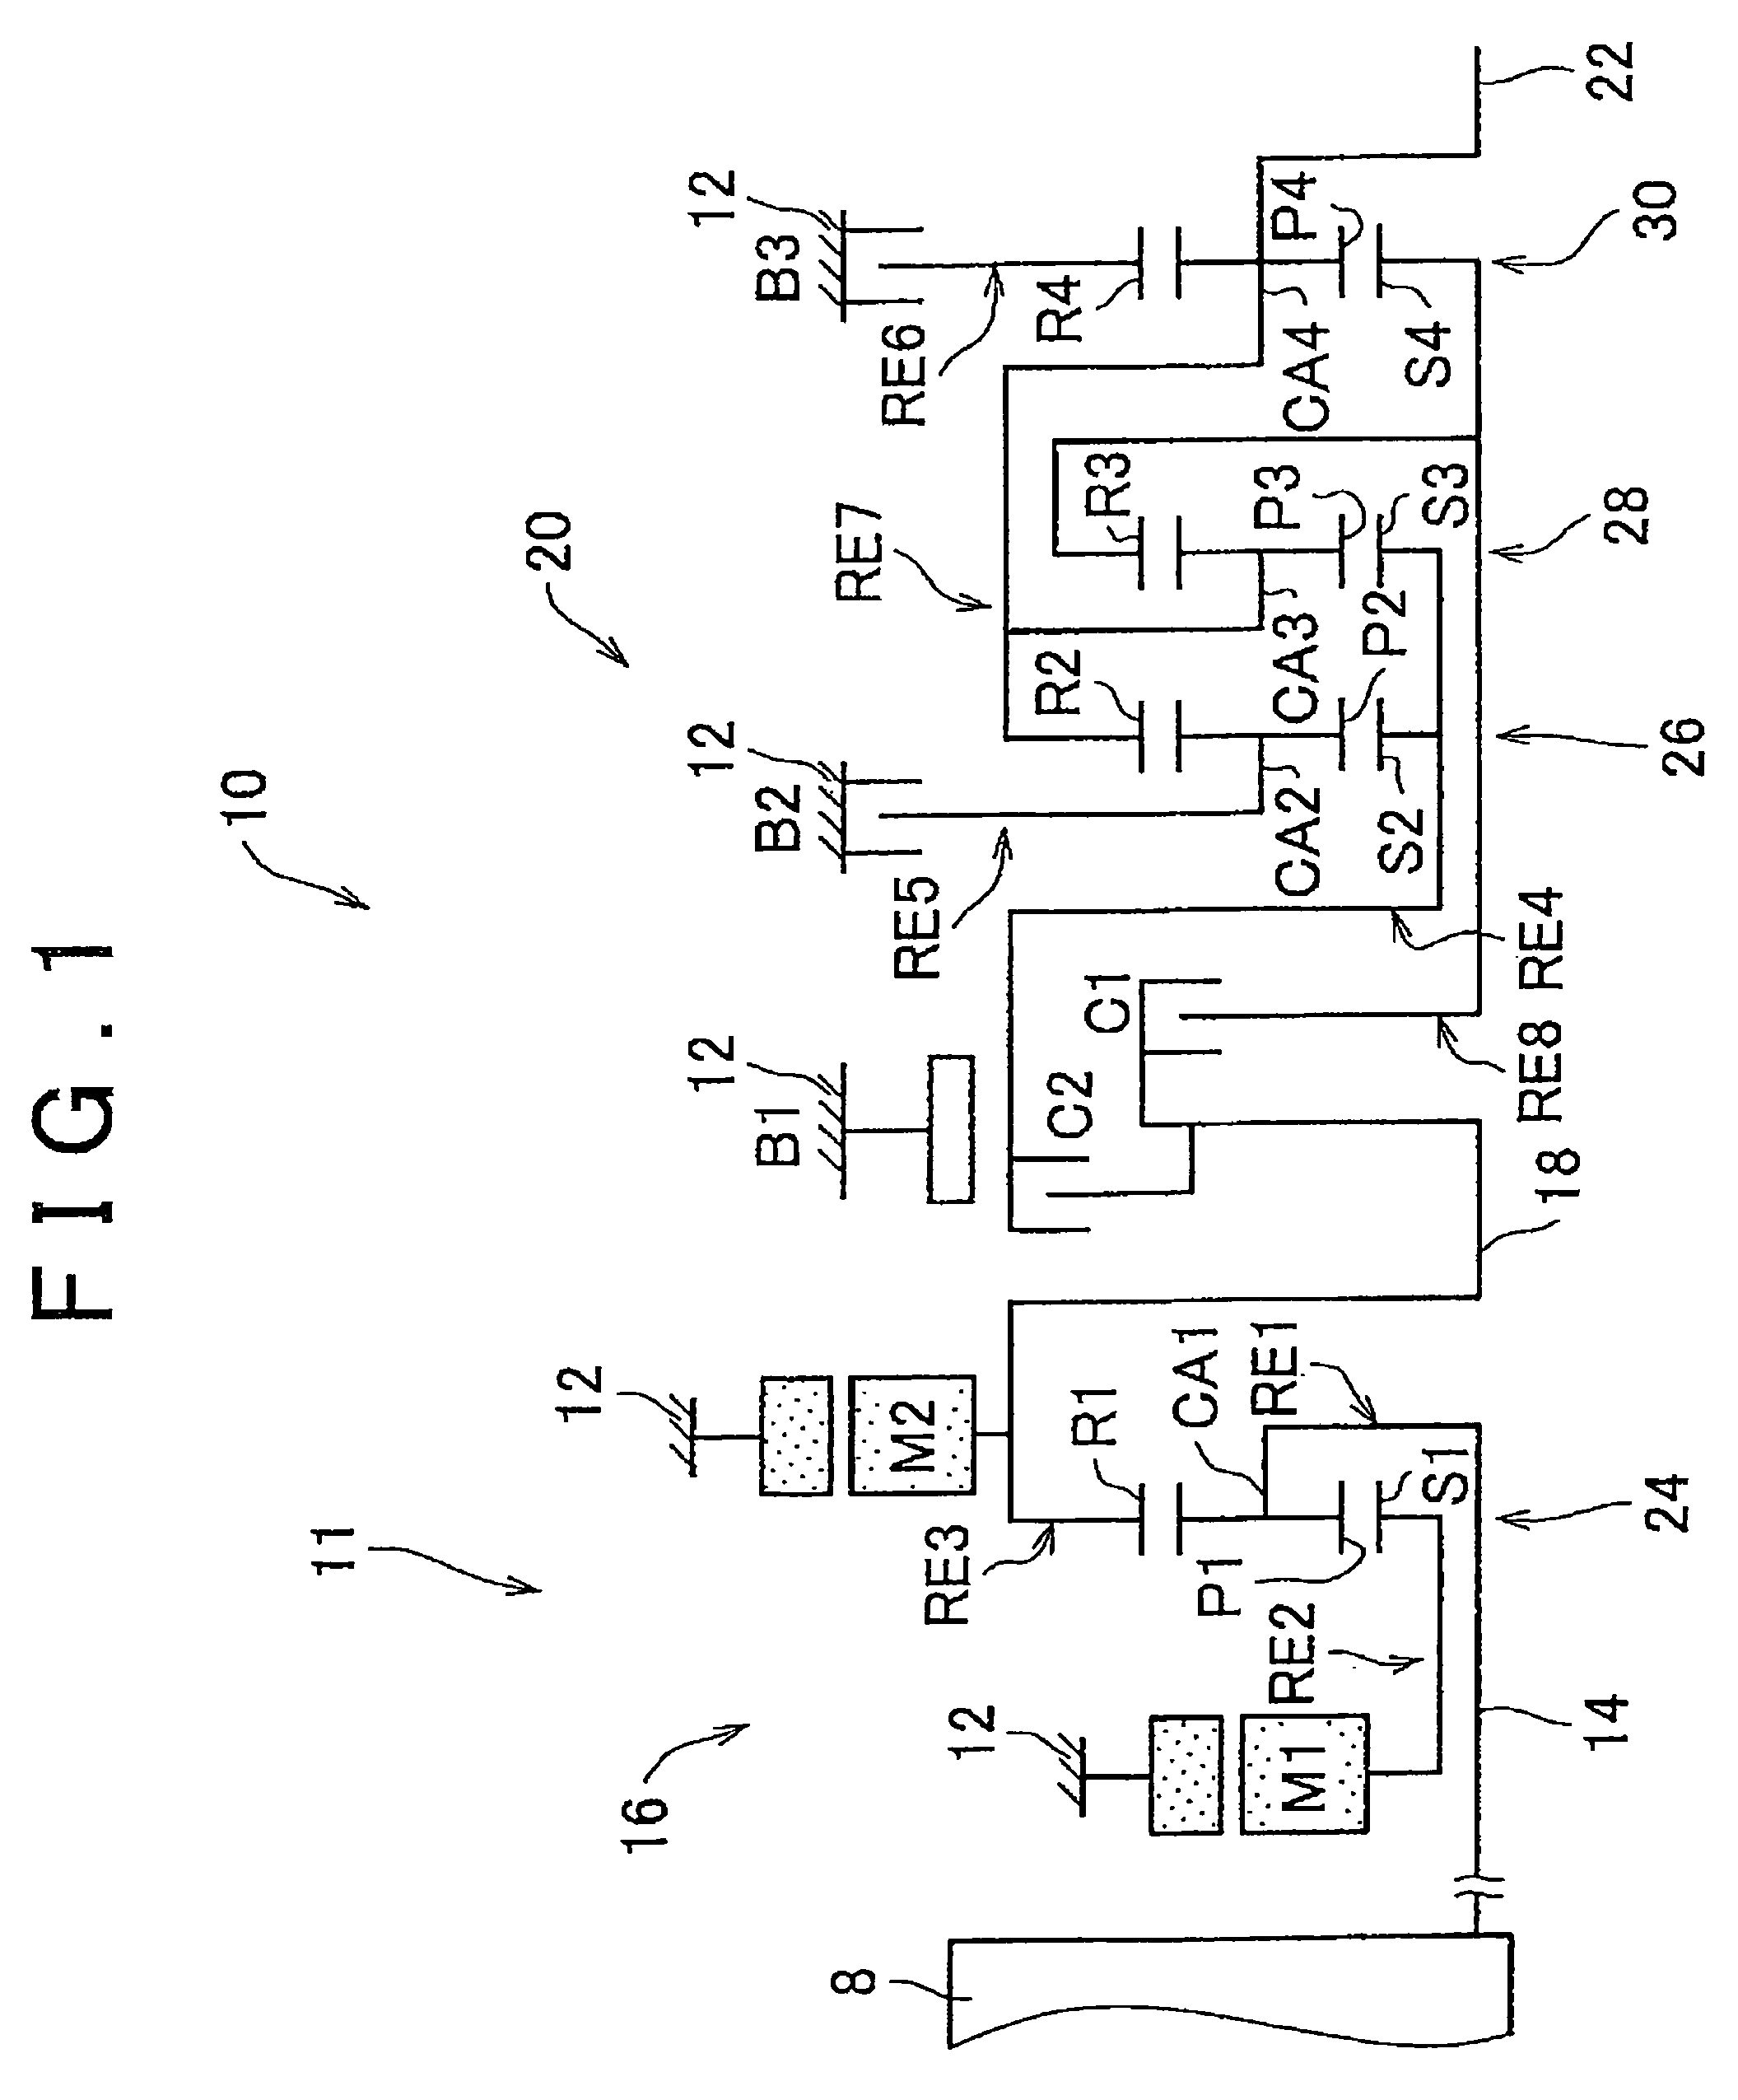 Control for vehicle power transmission system